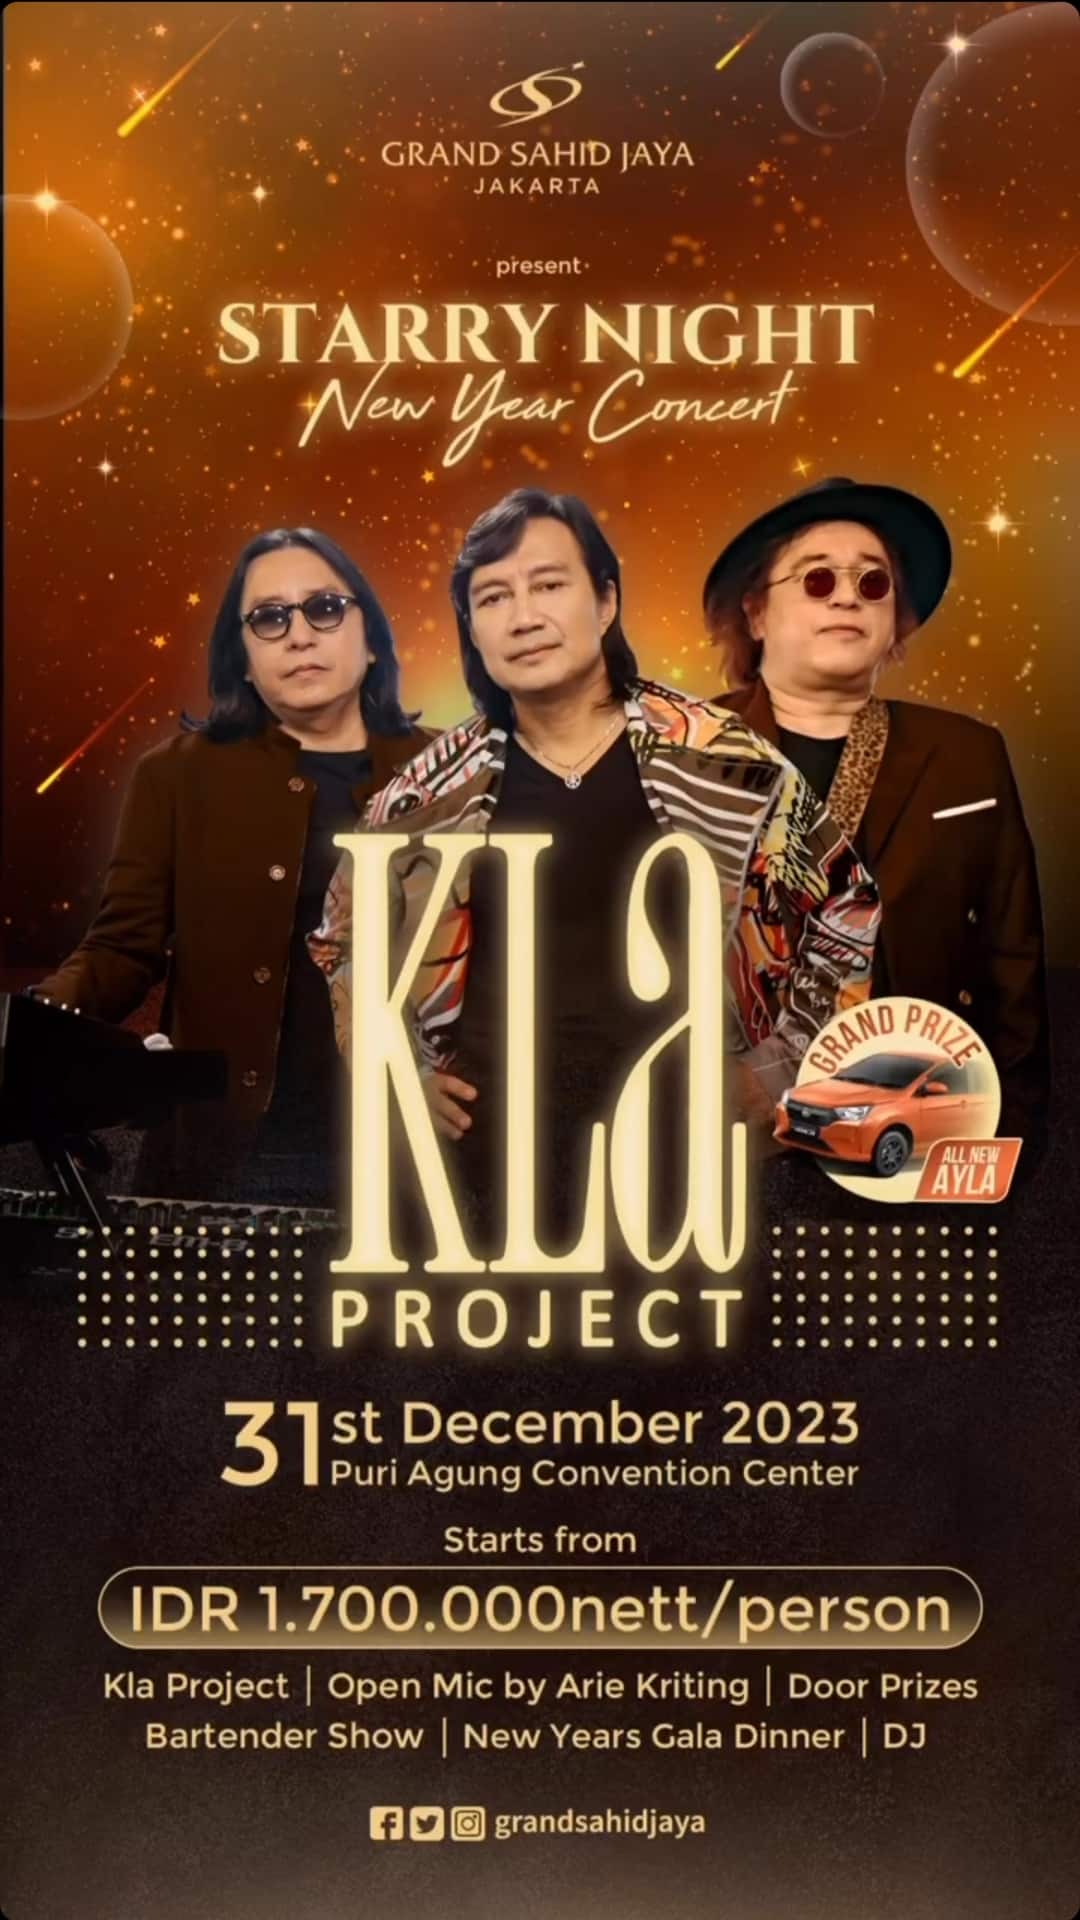 A Starry Night New Year Concert with KLa Project